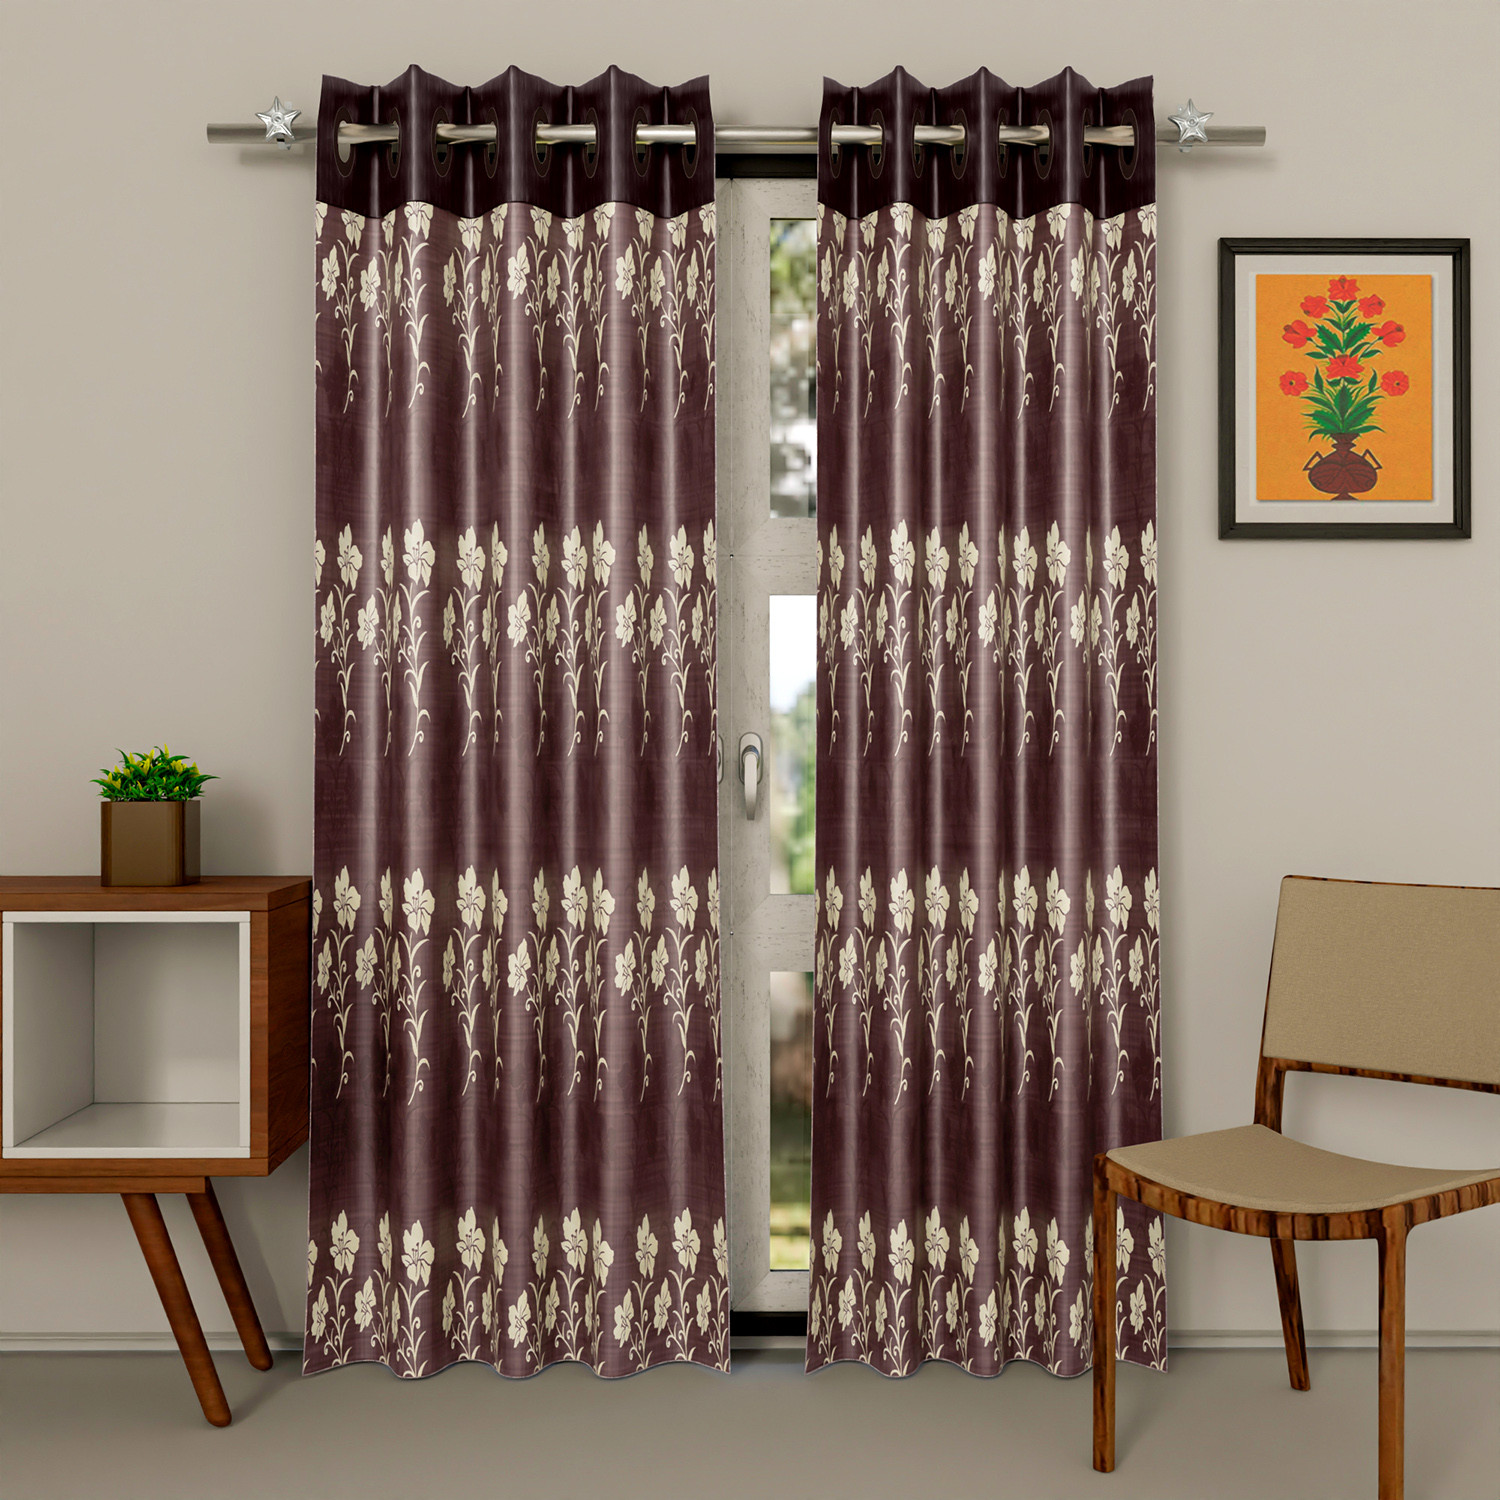 Kuber Industries Faux Silk Decorative 9 Feet Long Door Curtain | Floral Print Blackout Drapes Curtain With 8 Eyelet For Home & Office (Light Brown)